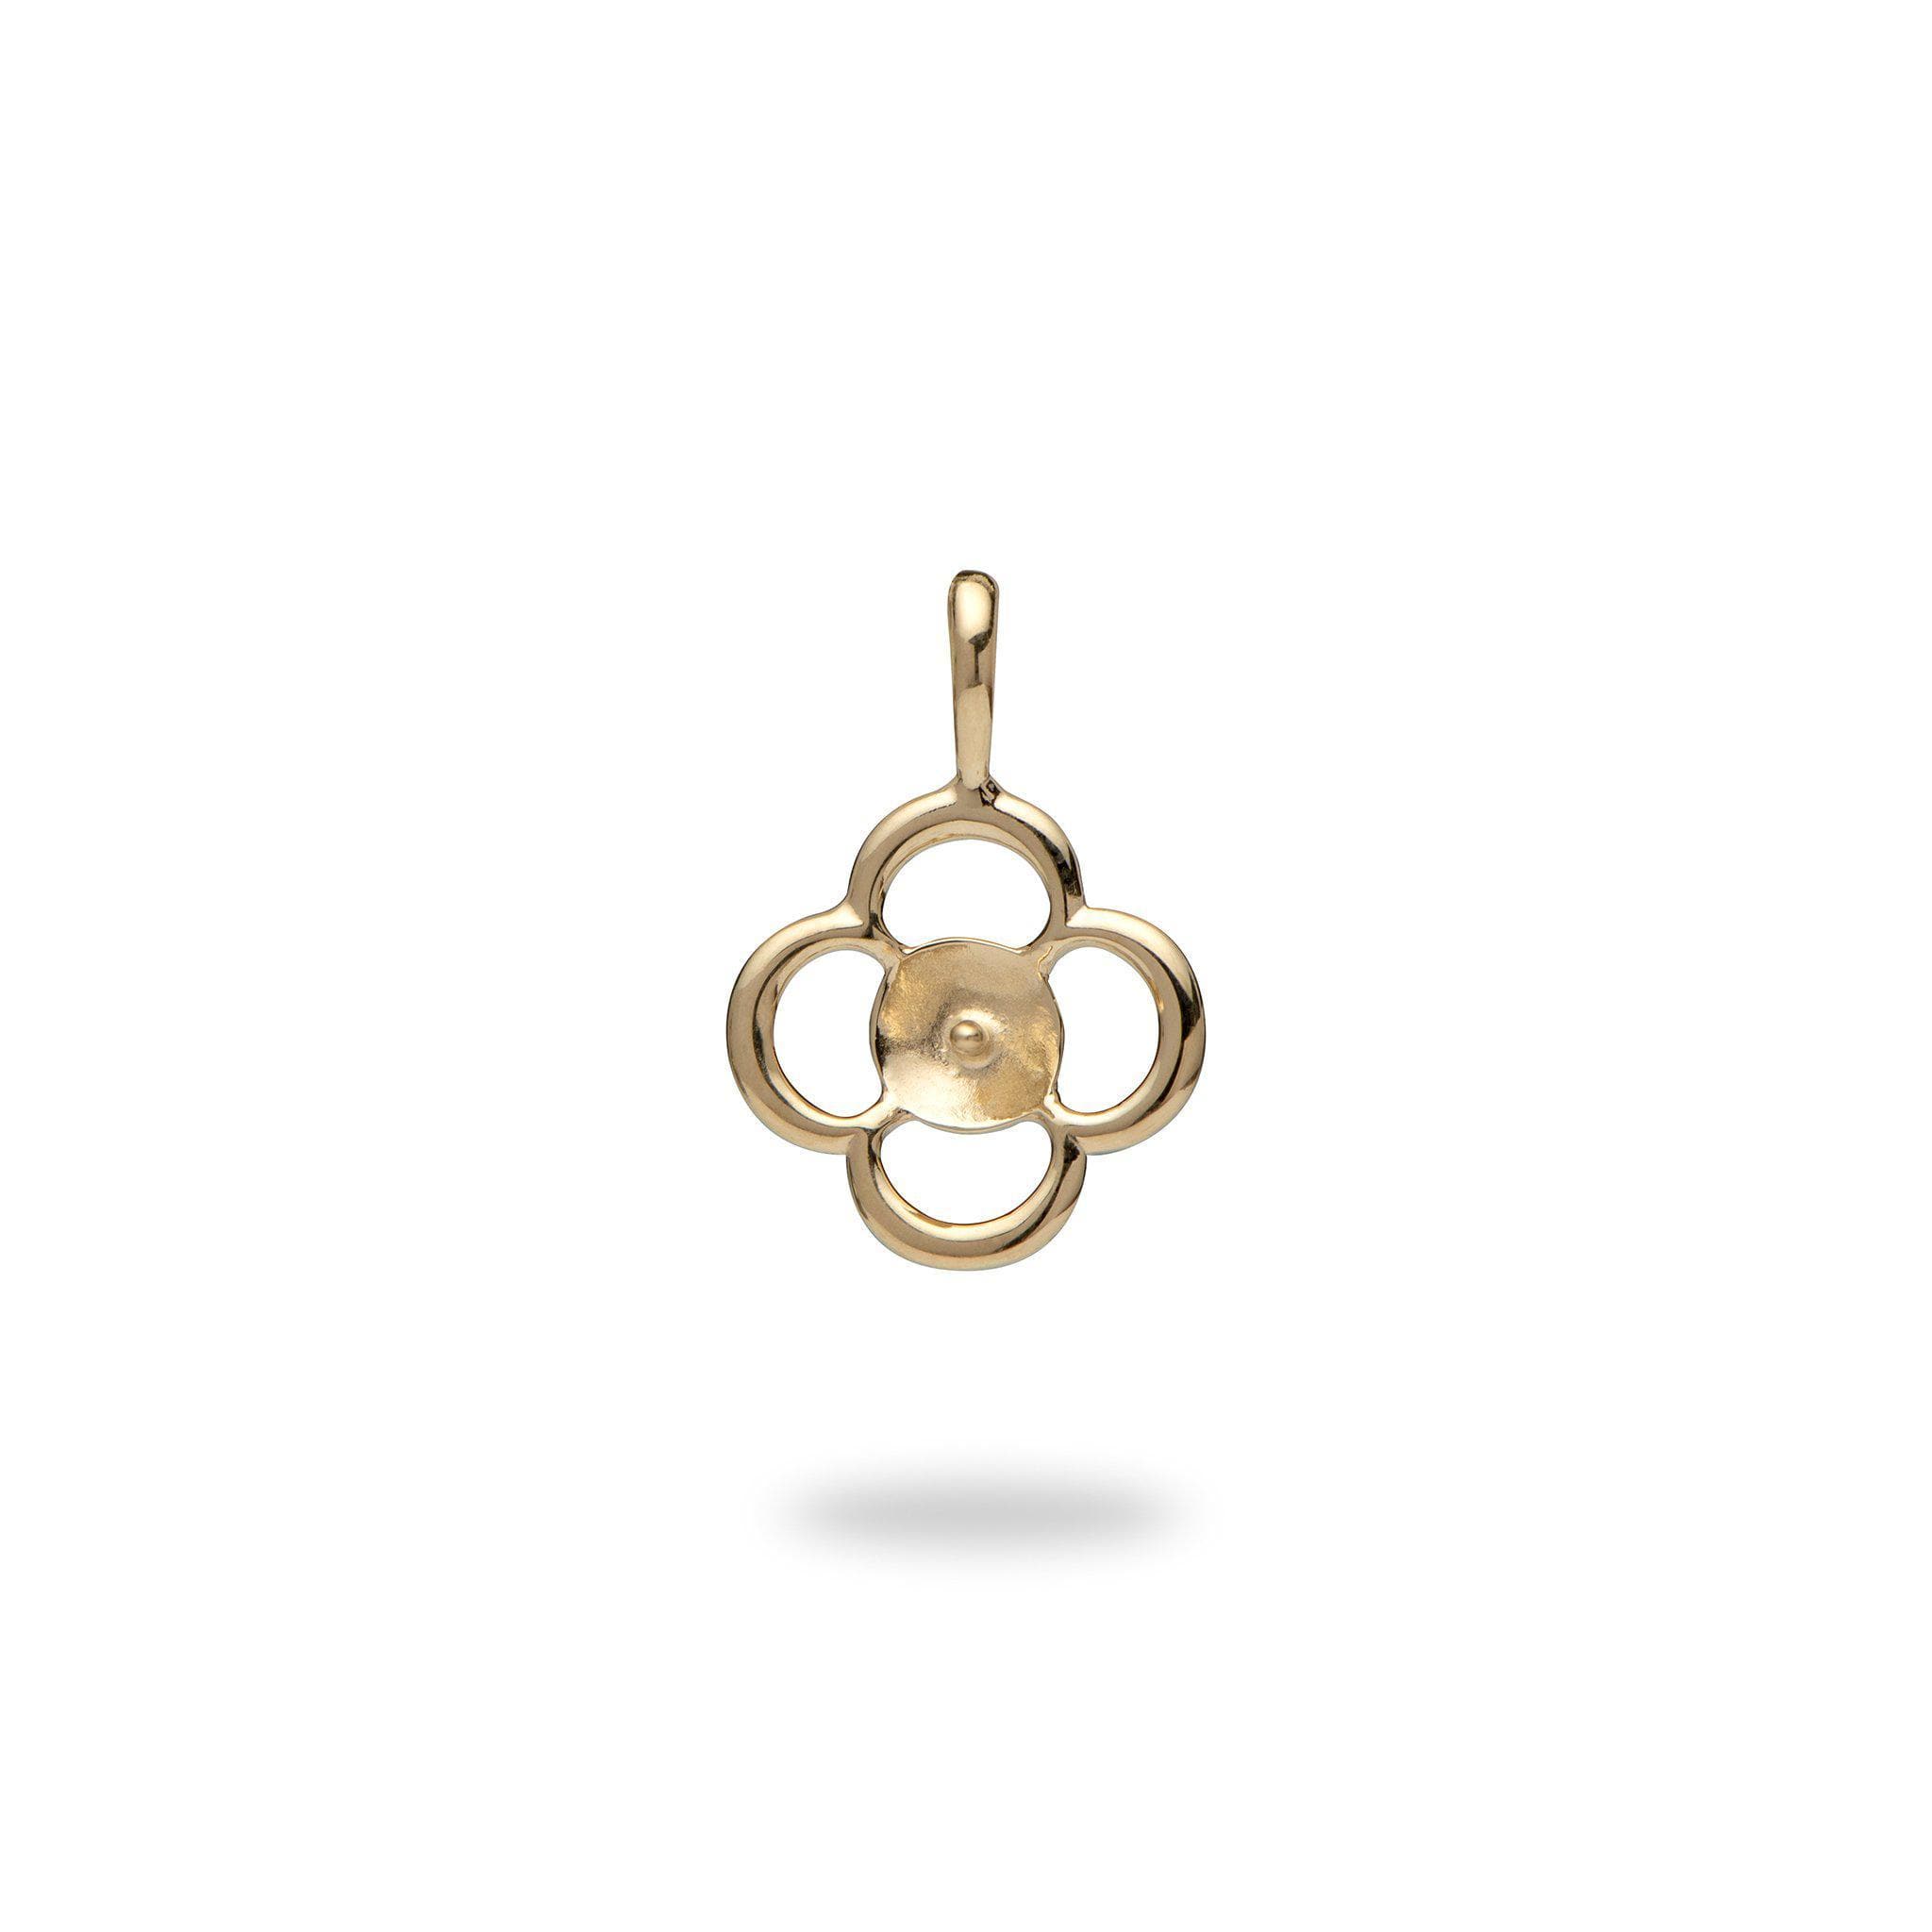 Pick-a-Pearl 4 Leaf Clover Pendant in Gold - Maui Divers Jewelry